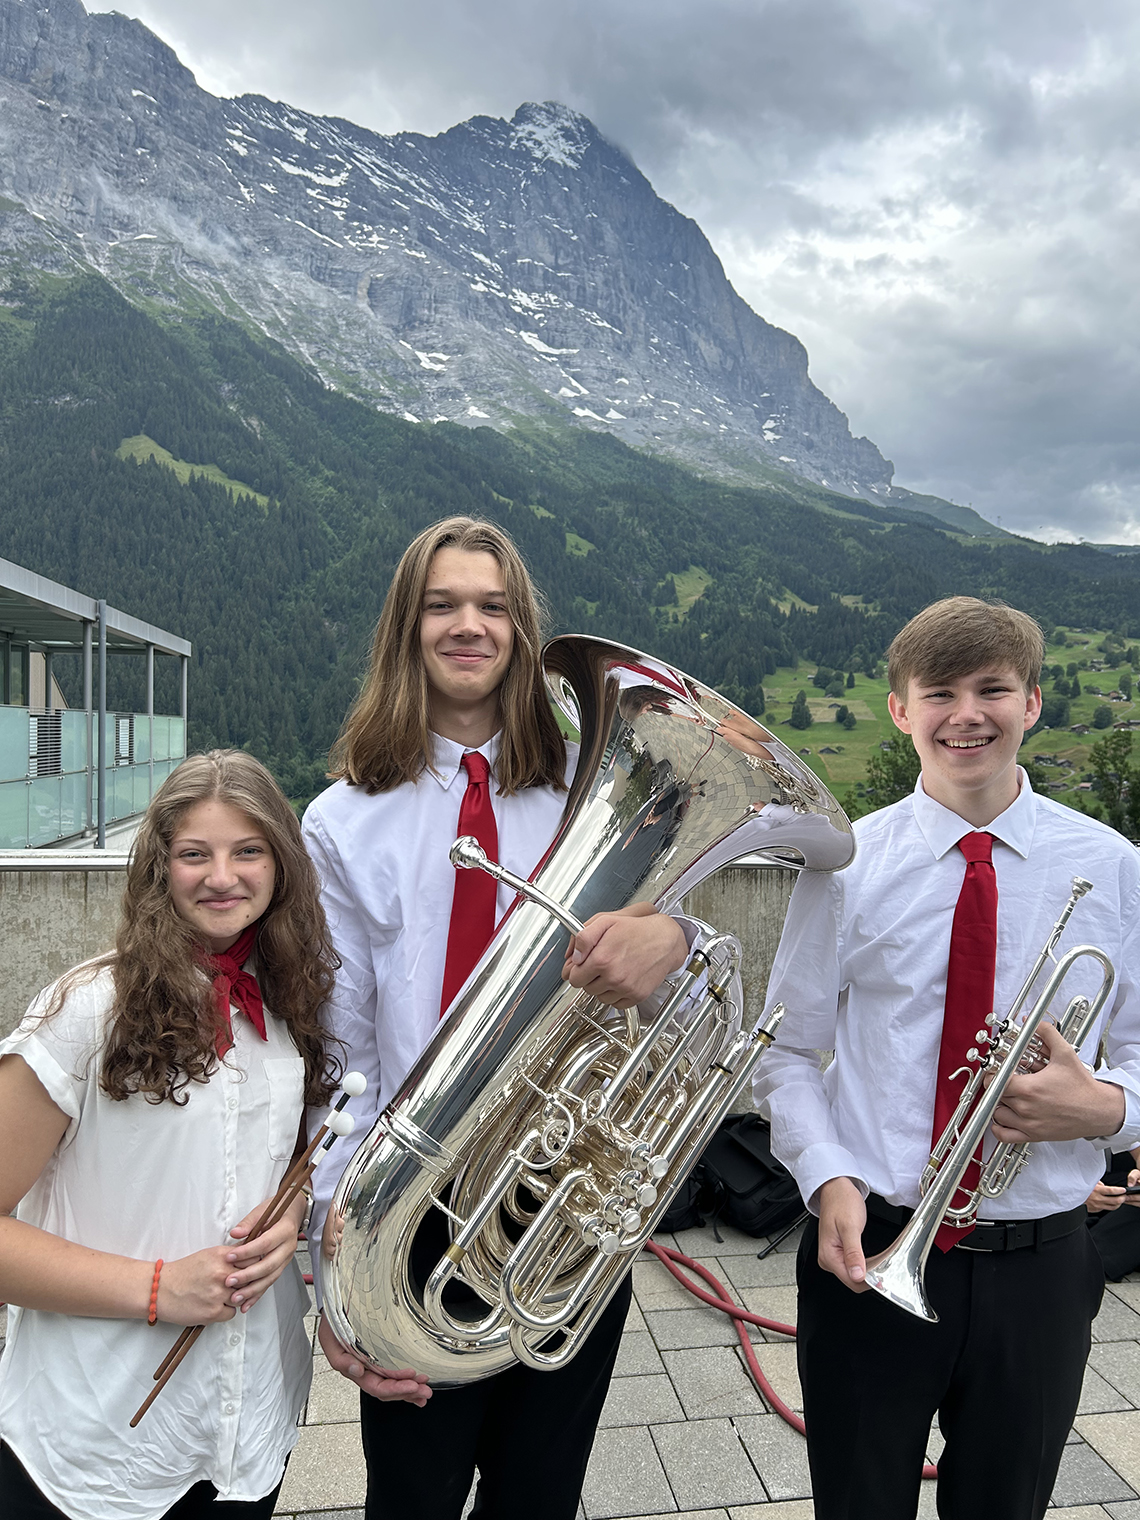 Ari Hatzell, Tristan Morrison and Brady Rensel, all senior band performers, liked Switzerland the most.